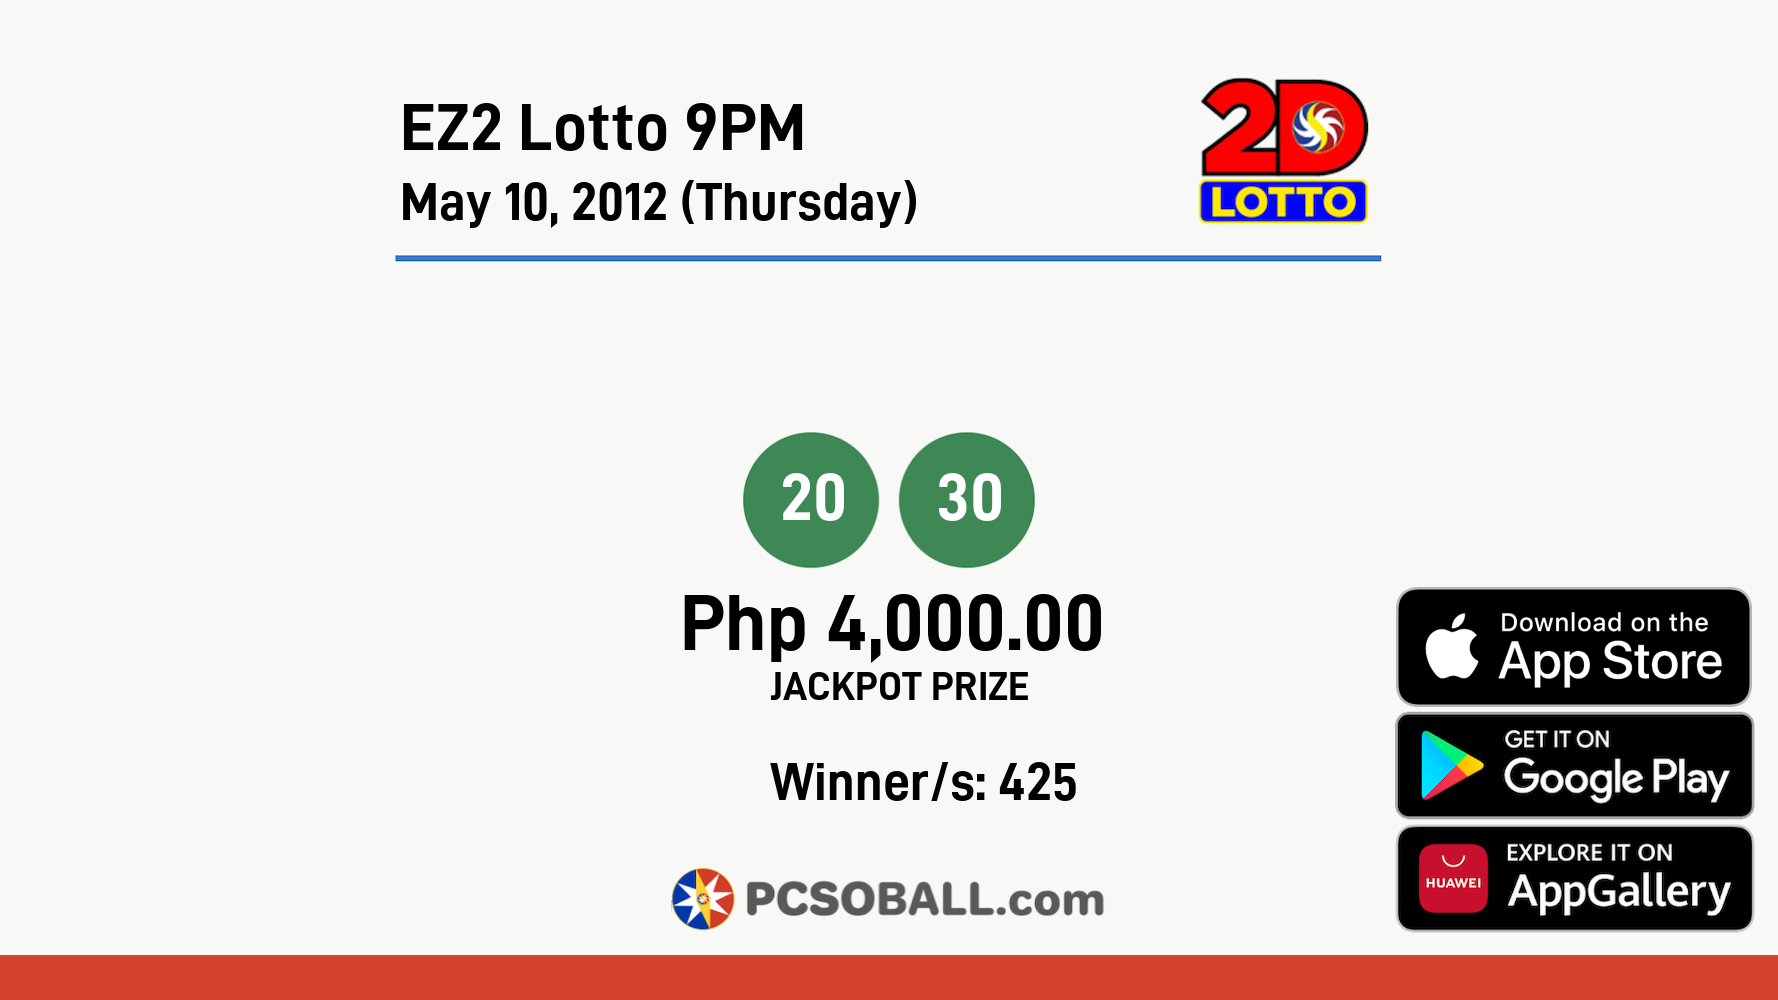 EZ2 Lotto 9PM May 10, 2012 (Thursday) Result